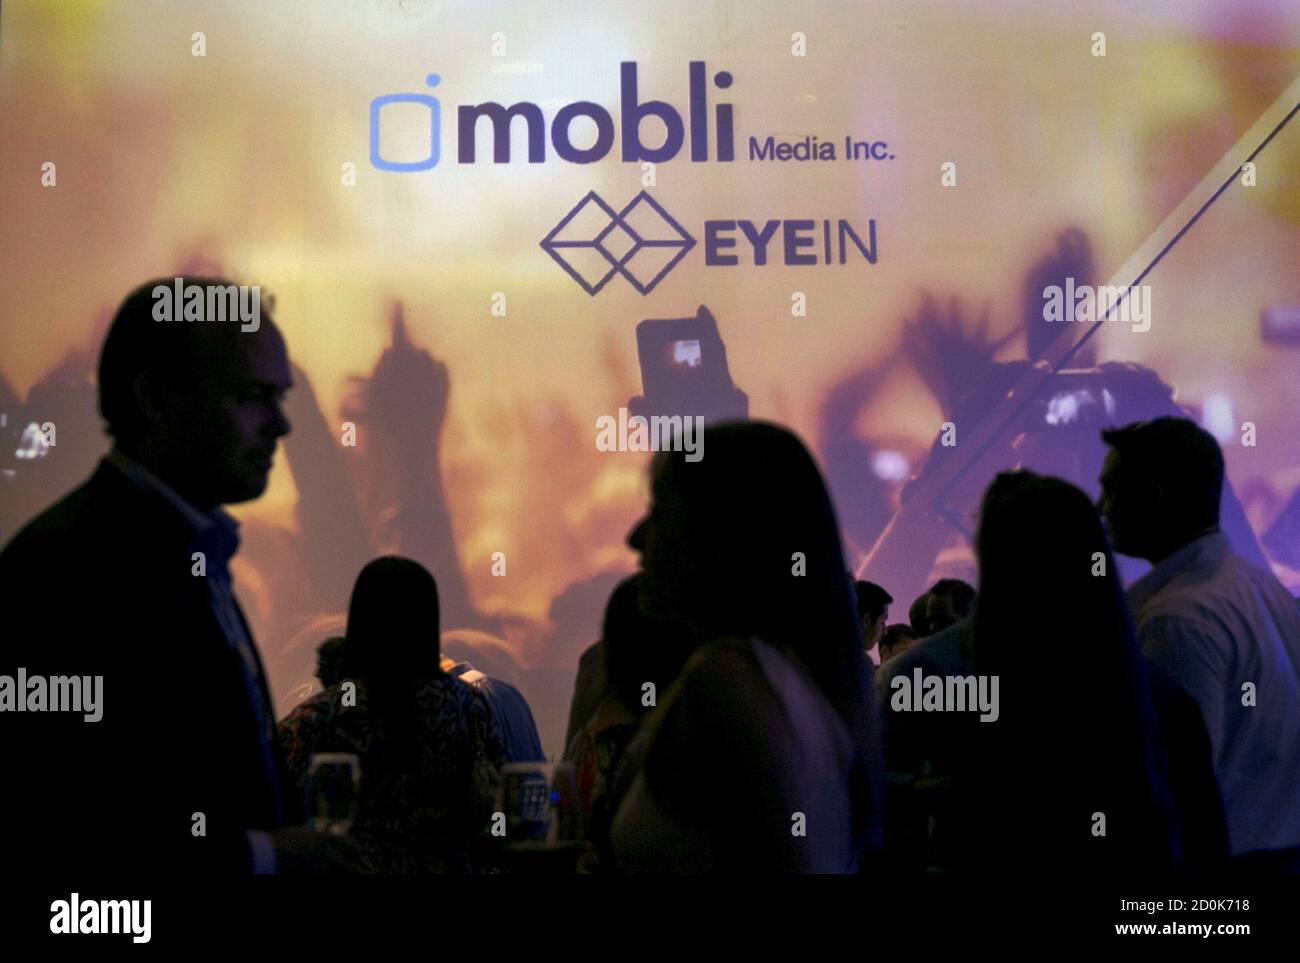 People are silhouetted in front of a screen depicting the logo of Israeli start-up, Mobli Media Inc, during their launch in Tel Aviv, Israel June 15, 2015. Israeli start-up Mobli Media Inc is taking on Internet giants Google, Facebook and Yahoo with an innovative online search tool to find the latest photos and videos across social media sites, the company said on Monday. REUTERS/Baz Ratner Stock Photo